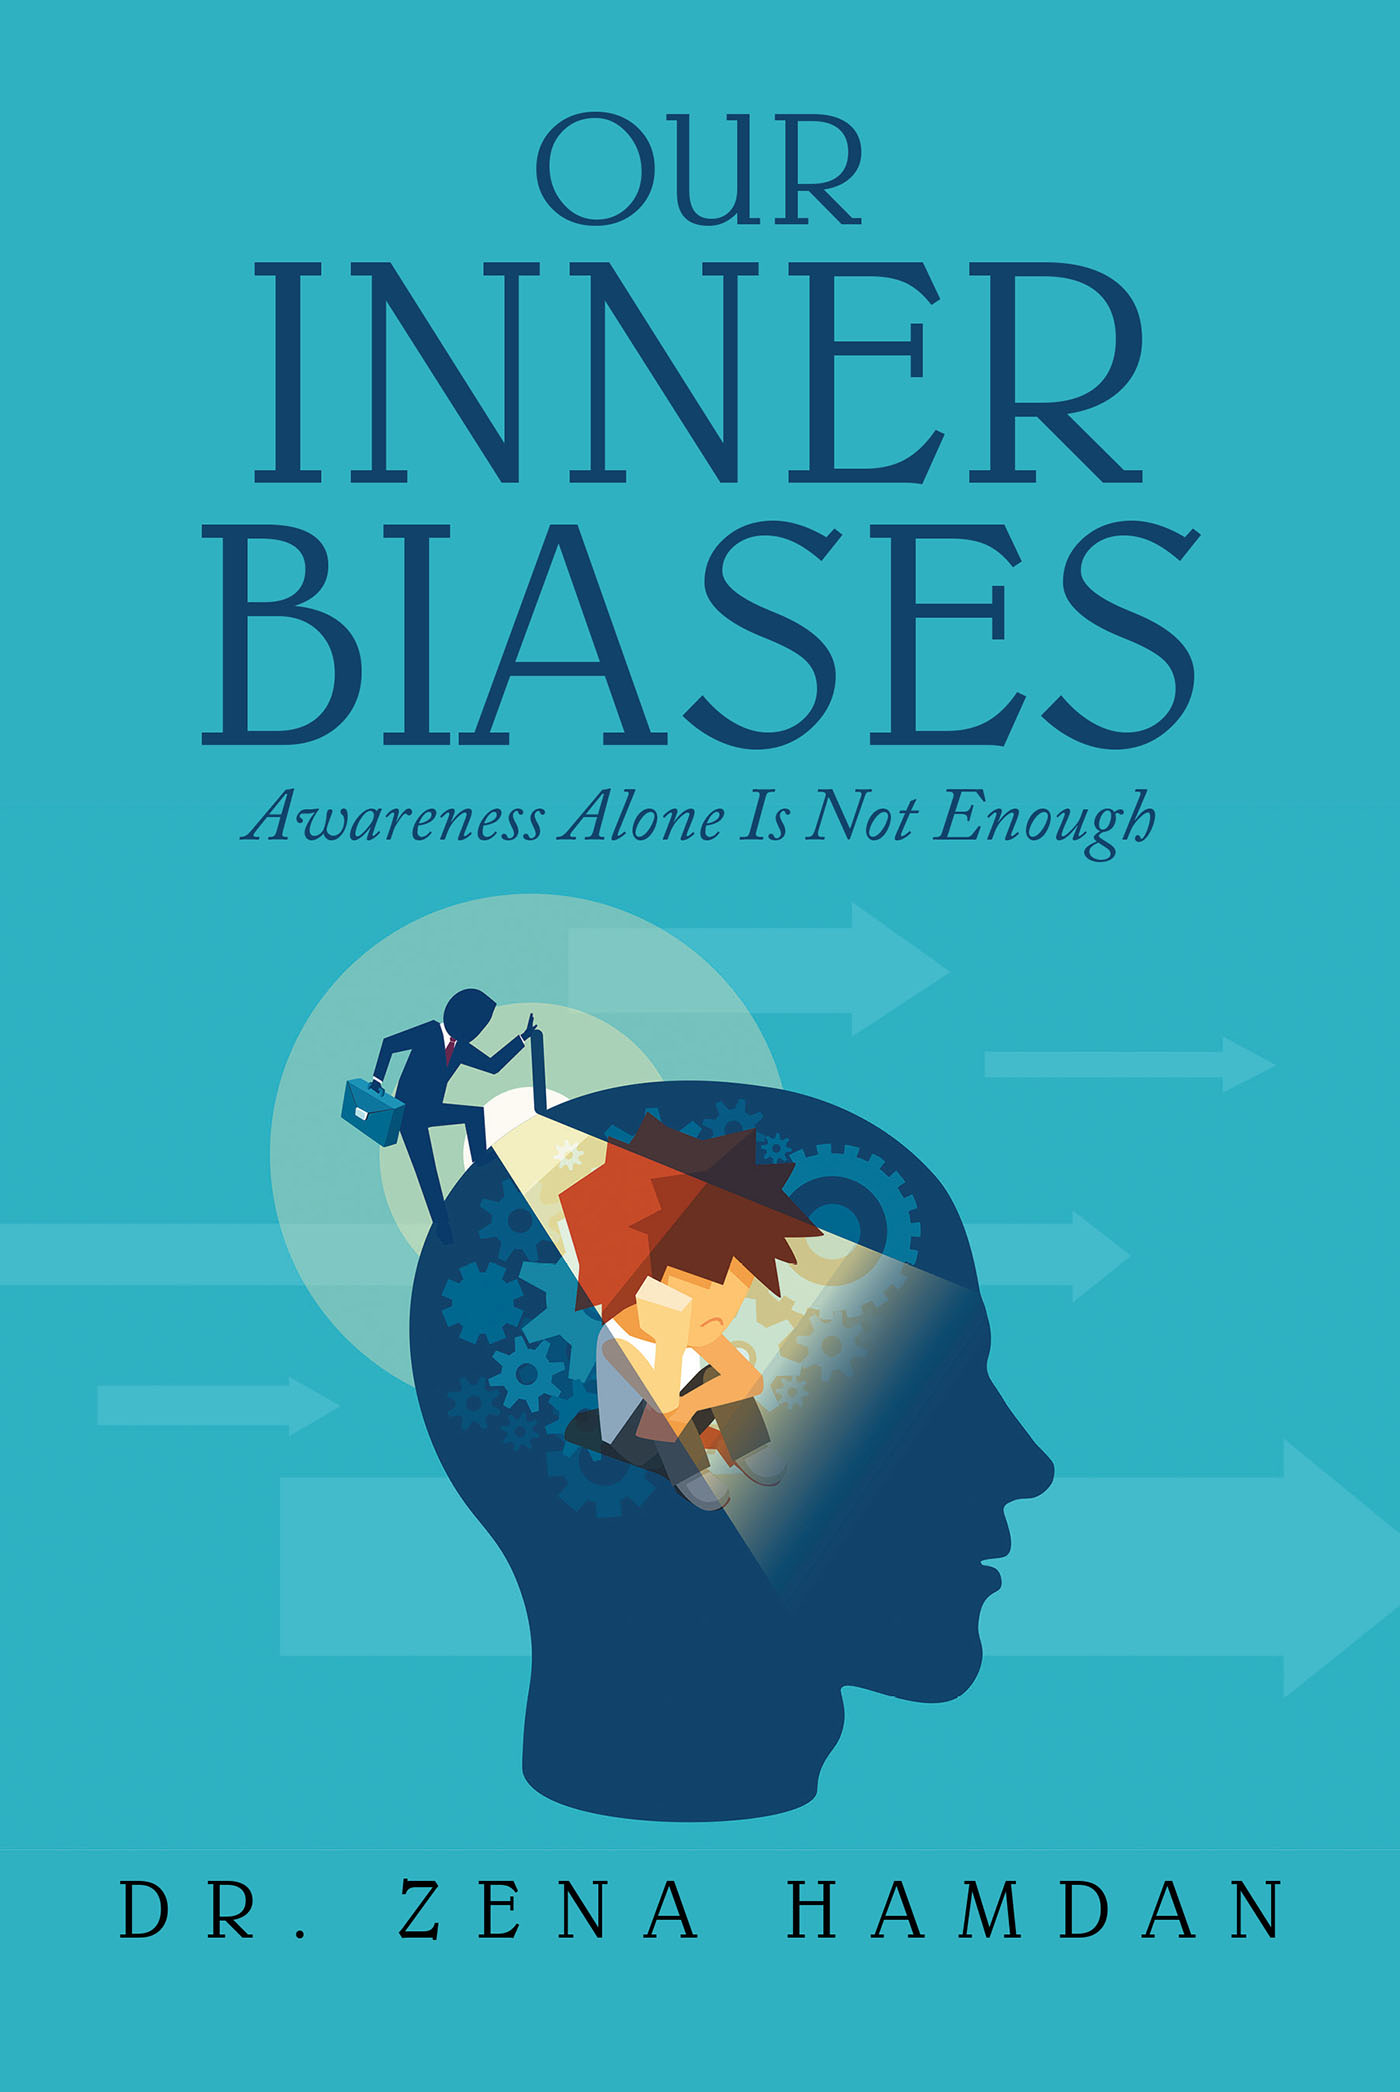 Dr. Zena Hamdan’s New Book, “Our Inner Biases: Awareness Alone Is Not Enough,” Explores the Steps Required to Help Control One’s Biased Perceptions of the World